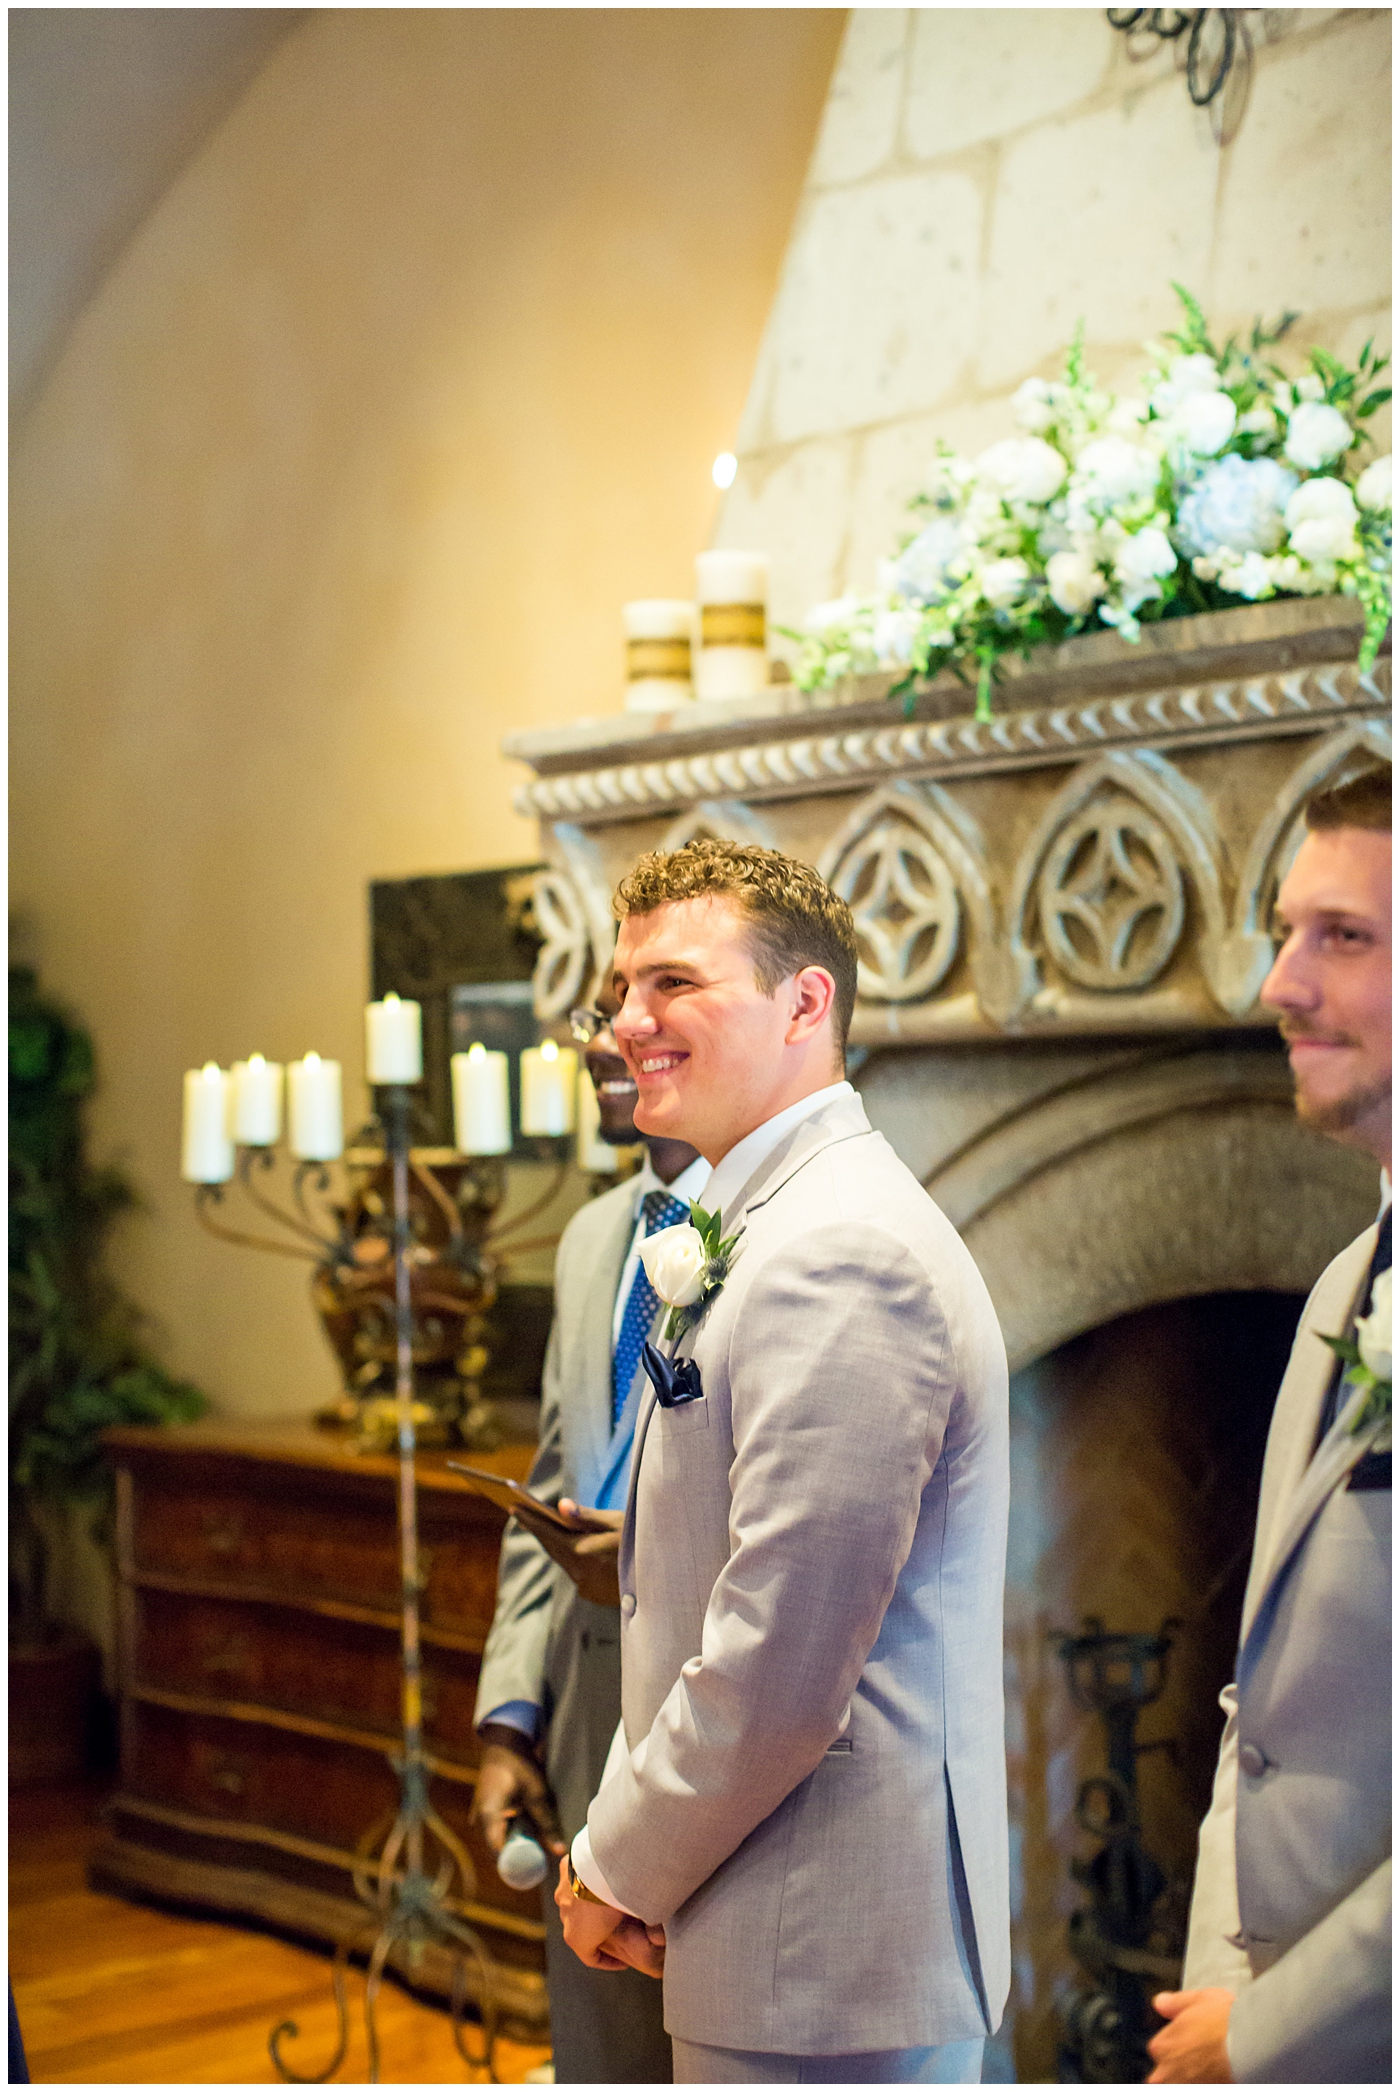 groom in grey suit with blue tie and white rose boutonniere seeing bride walking down the aisle for the first time on wedding day